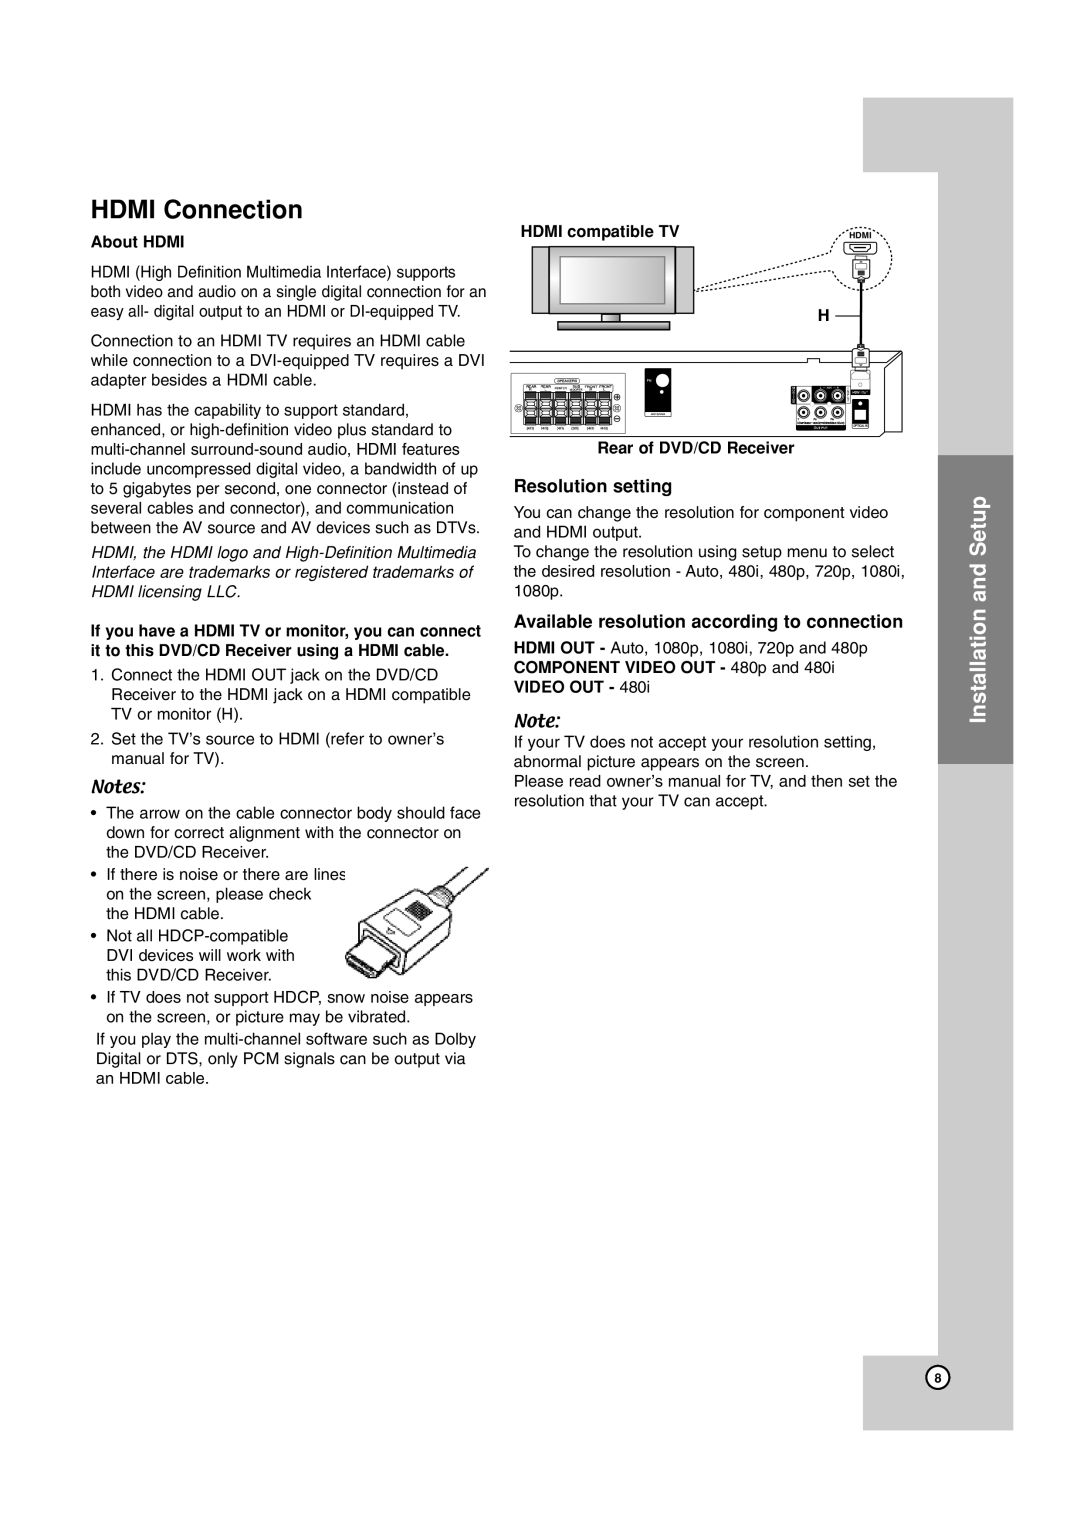 JVC TH-G40 manual HDMI Connection, Installation and Setup, Resolution setting, Available resolution according to connection 